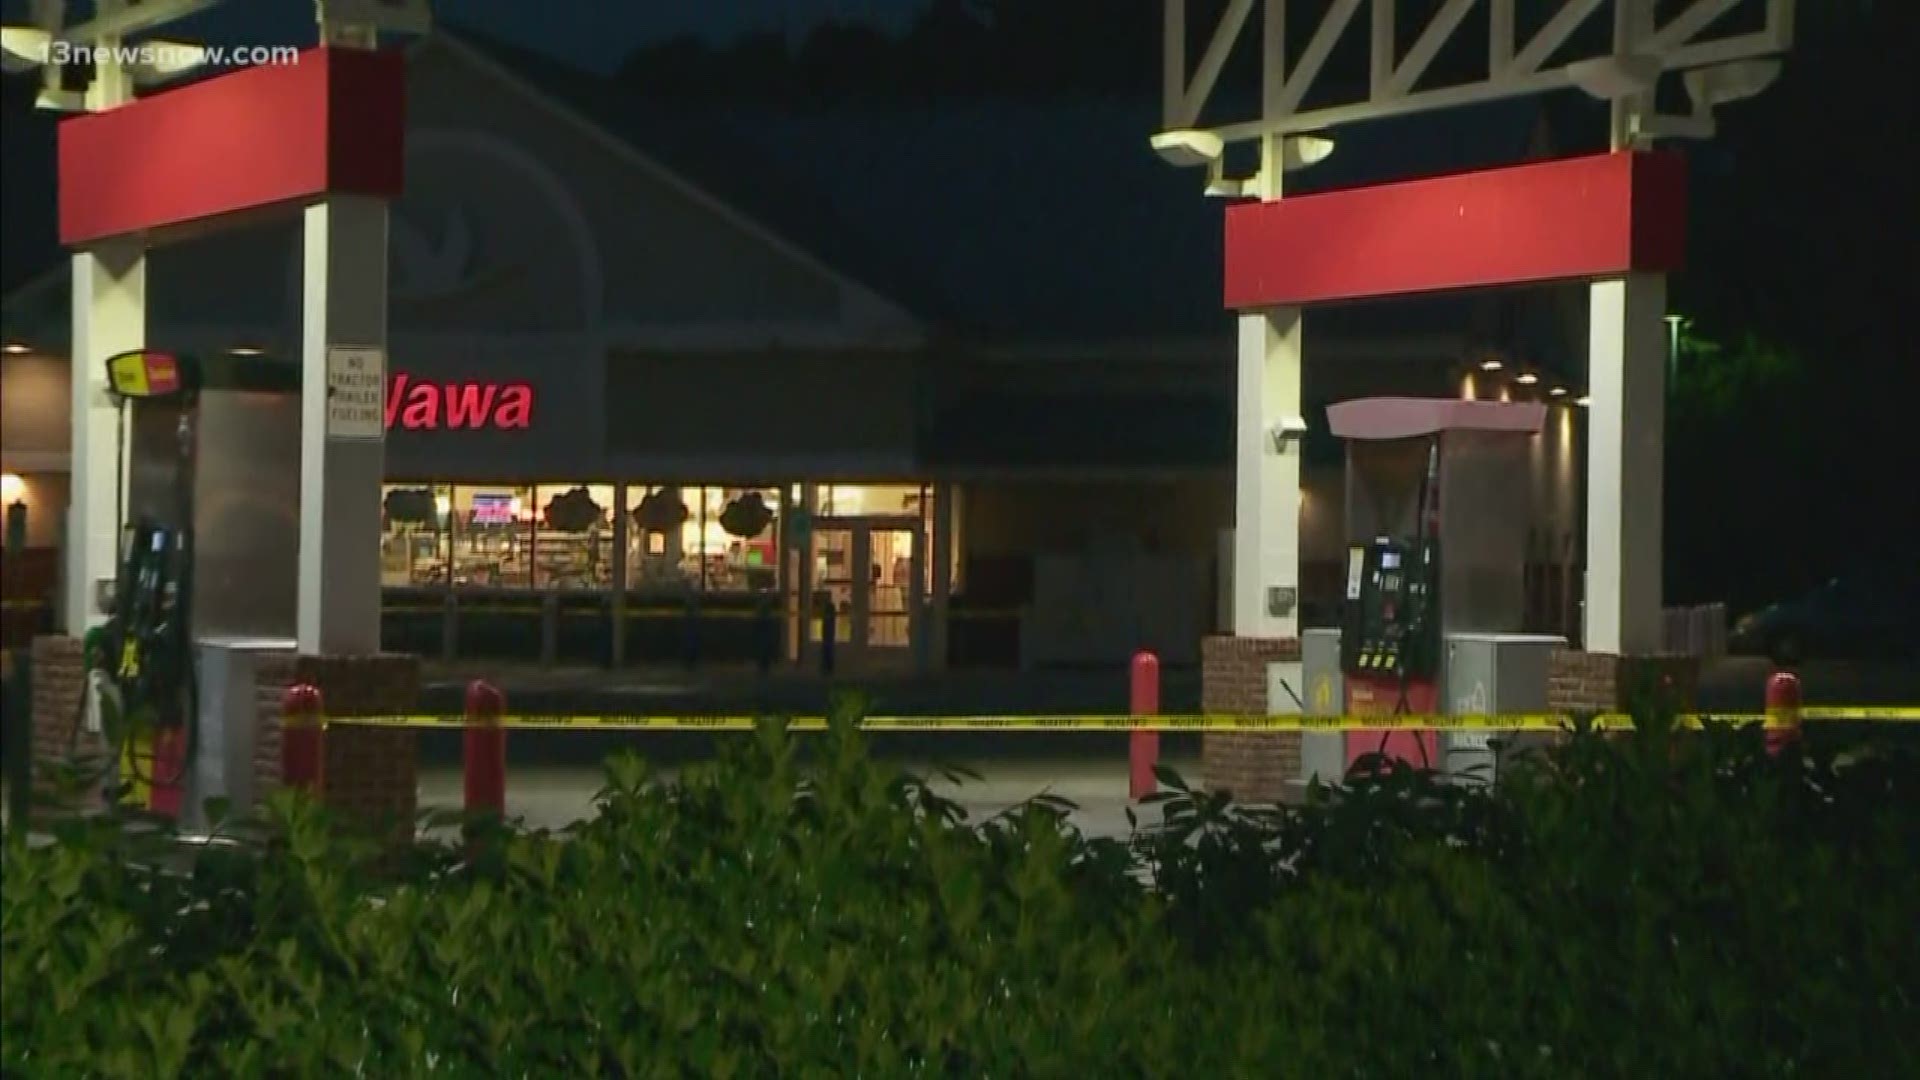 A woman who worked at the Wawa on East Little Creek Road was shot and killed Sunday evening while sitting in her car.